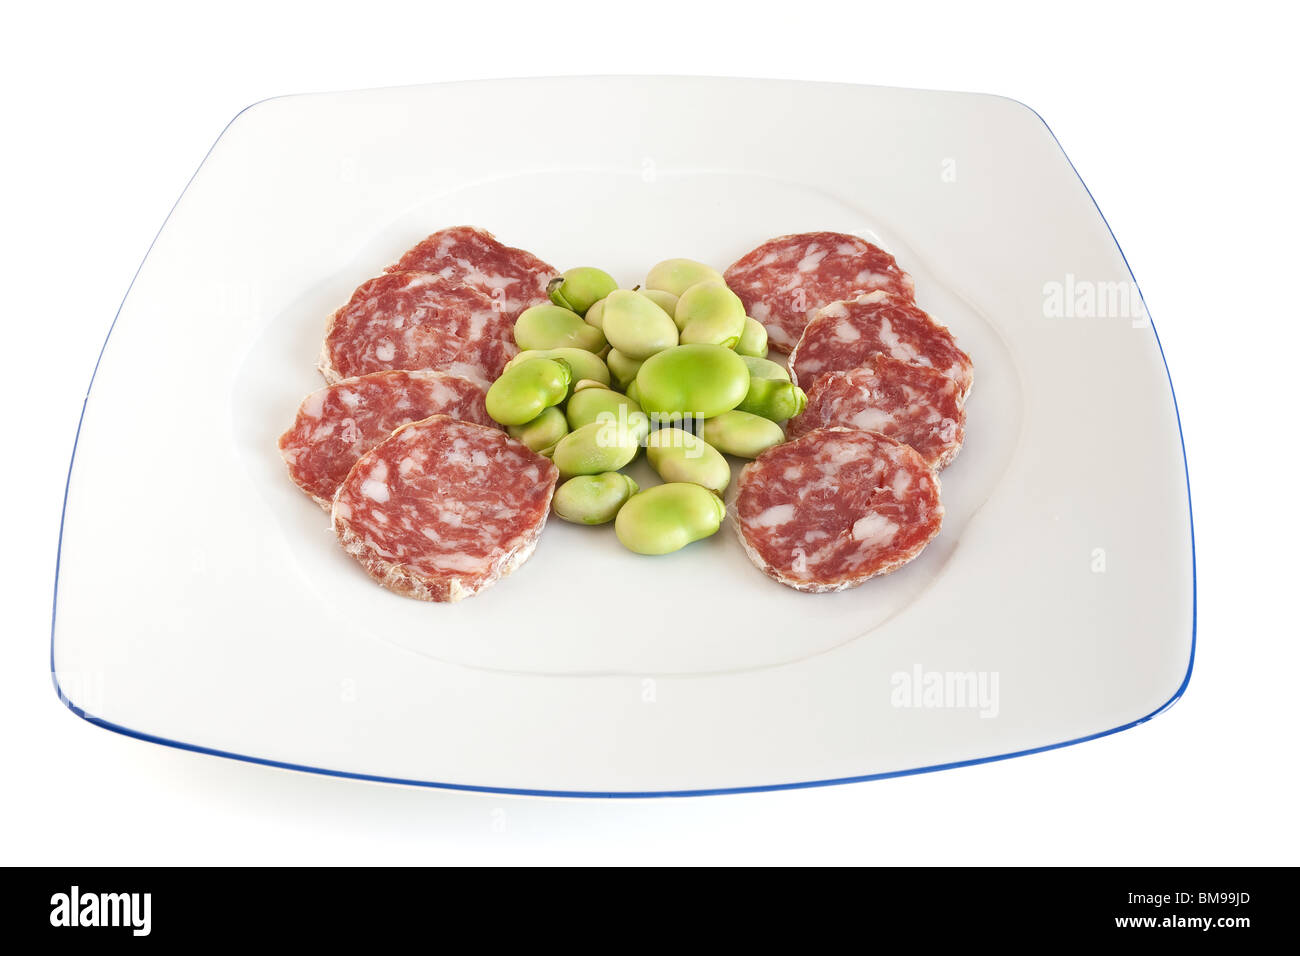 broad beans and salami sliced on a white plate isolated with clipping path Stock Photo